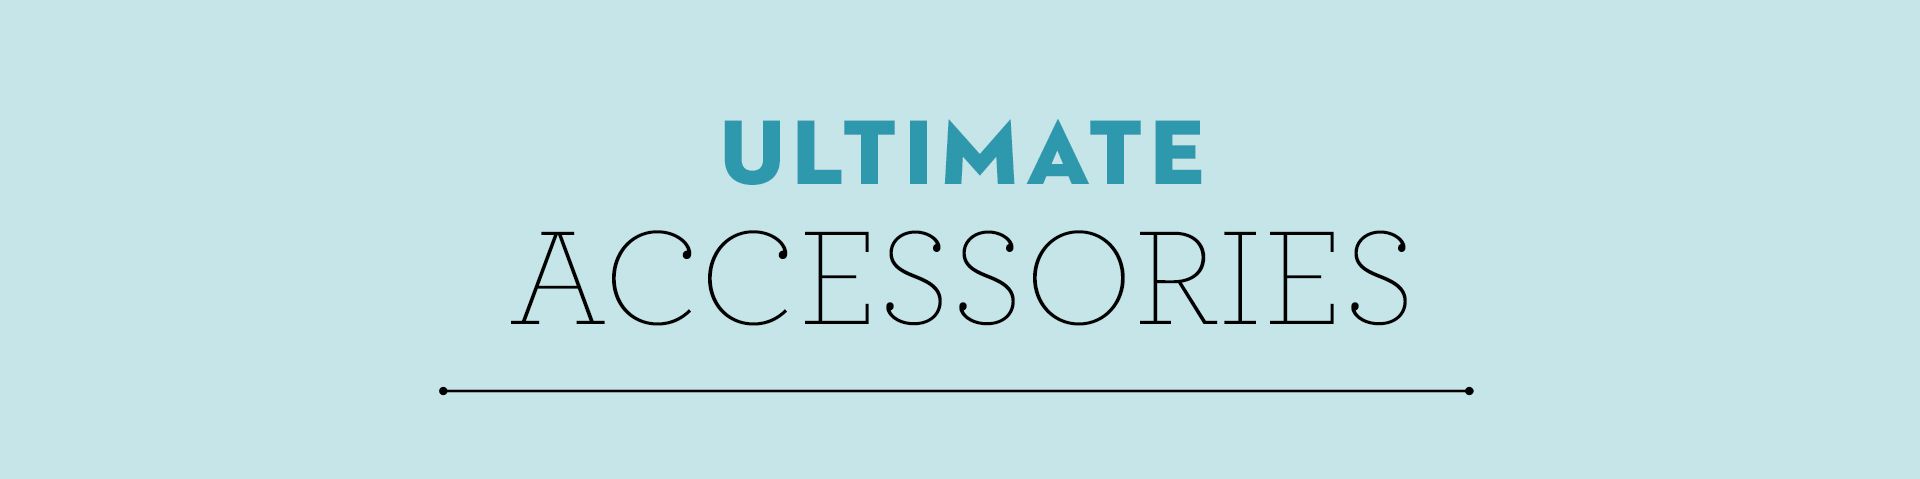 ultimate accessories section header